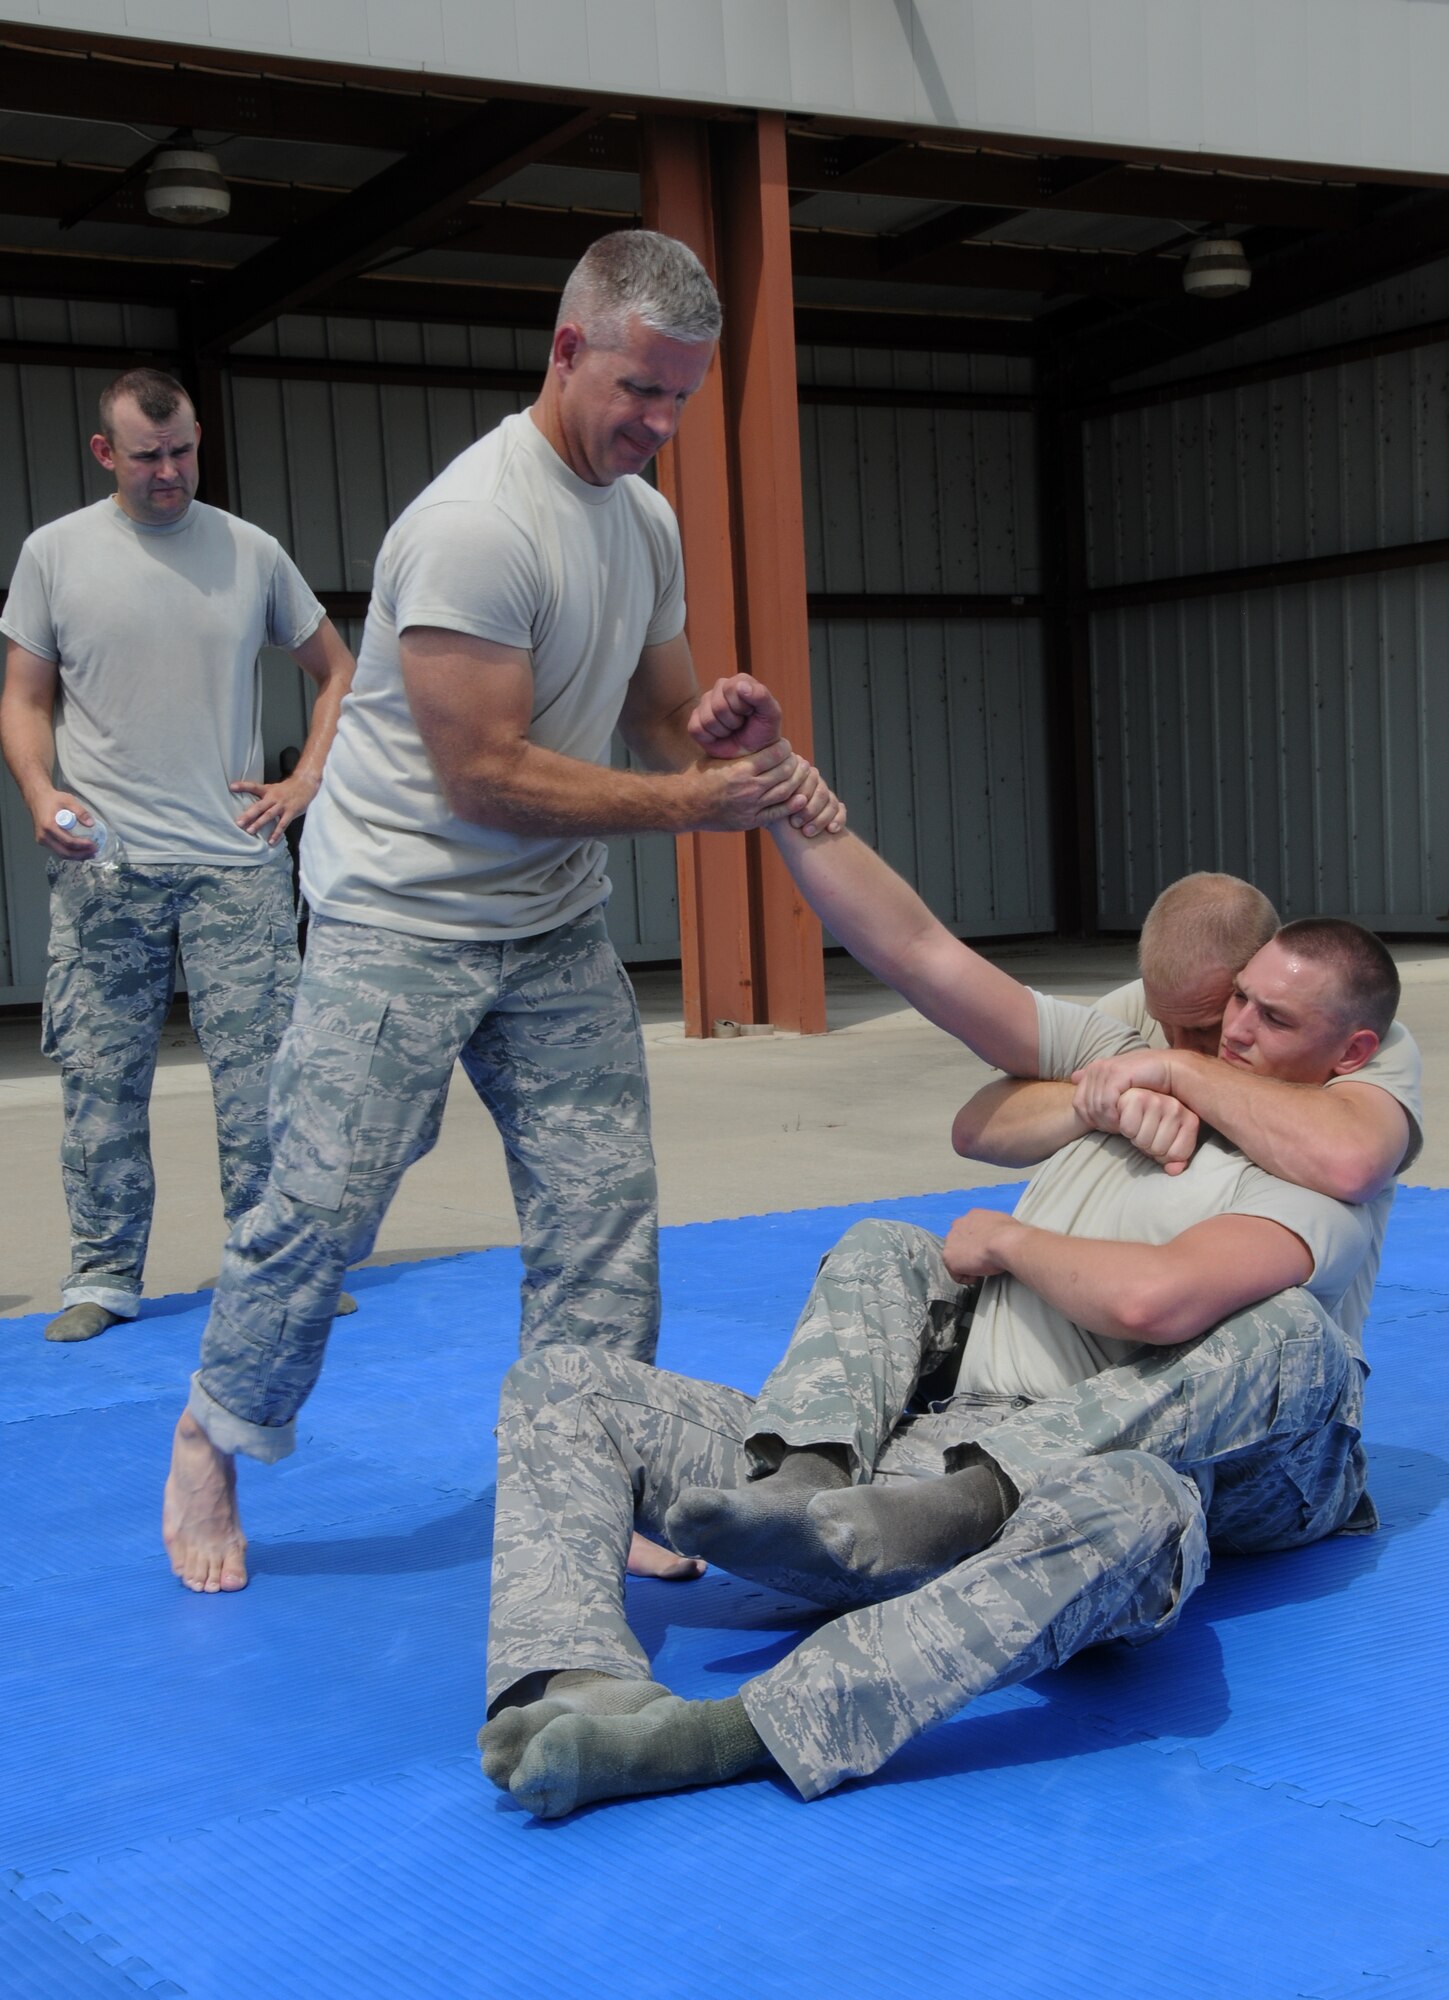 Tech. Sgt. Bradley C. Hobbs, Tech. Sgt. Timothy J. Holland and Senior Airman Mason E. Redding show members of the 188th Security Forces Squadron how to perform a technique during combative training at Ebbing Air National Guard Base, Fort Smith, Arkansas on Sept. 6, 2014. (U.S. Air National Guard photo by Airman 1st Class Cody Martin/Released)